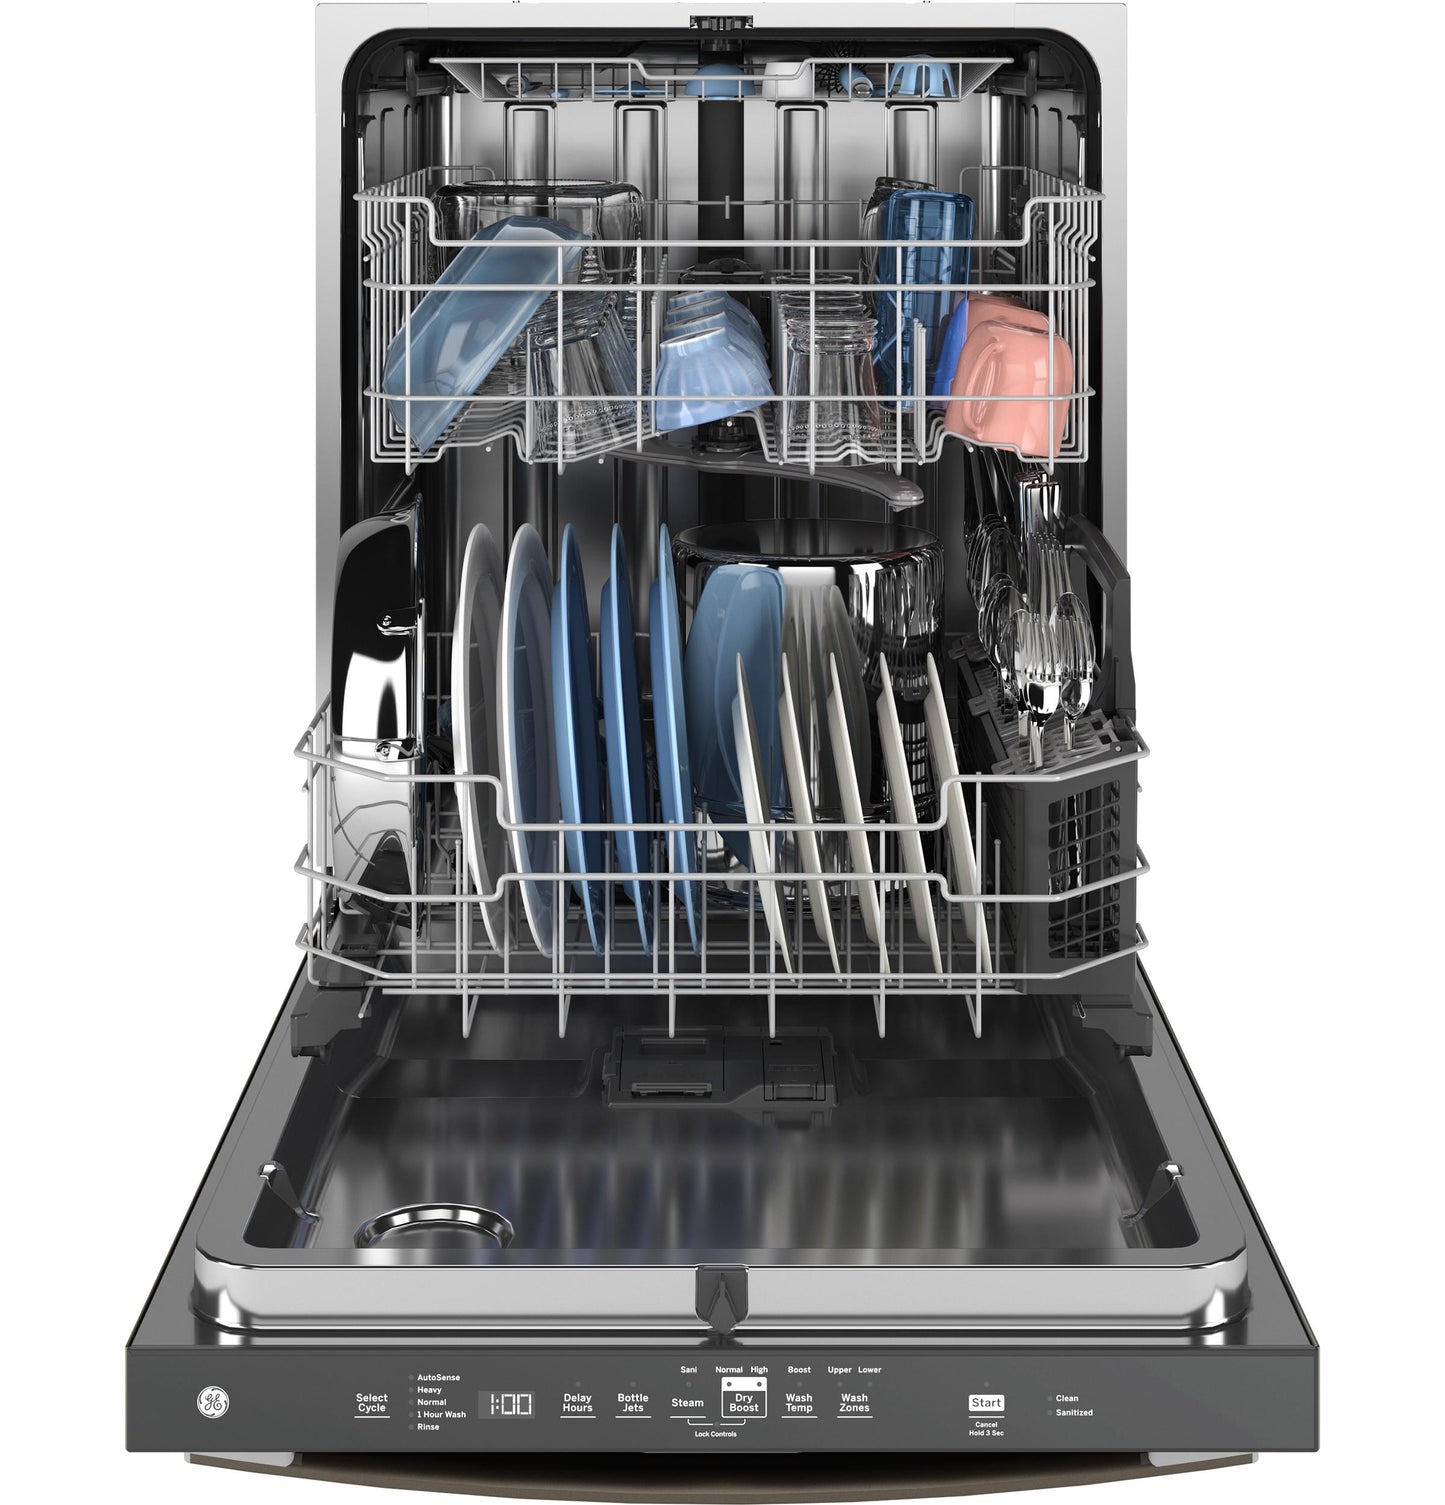 Ge Appliances GDT650SMVES Ge® Fingerprint Resistant Top Control With Stainless Steel Interior Dishwasher With Sanitize Cycle